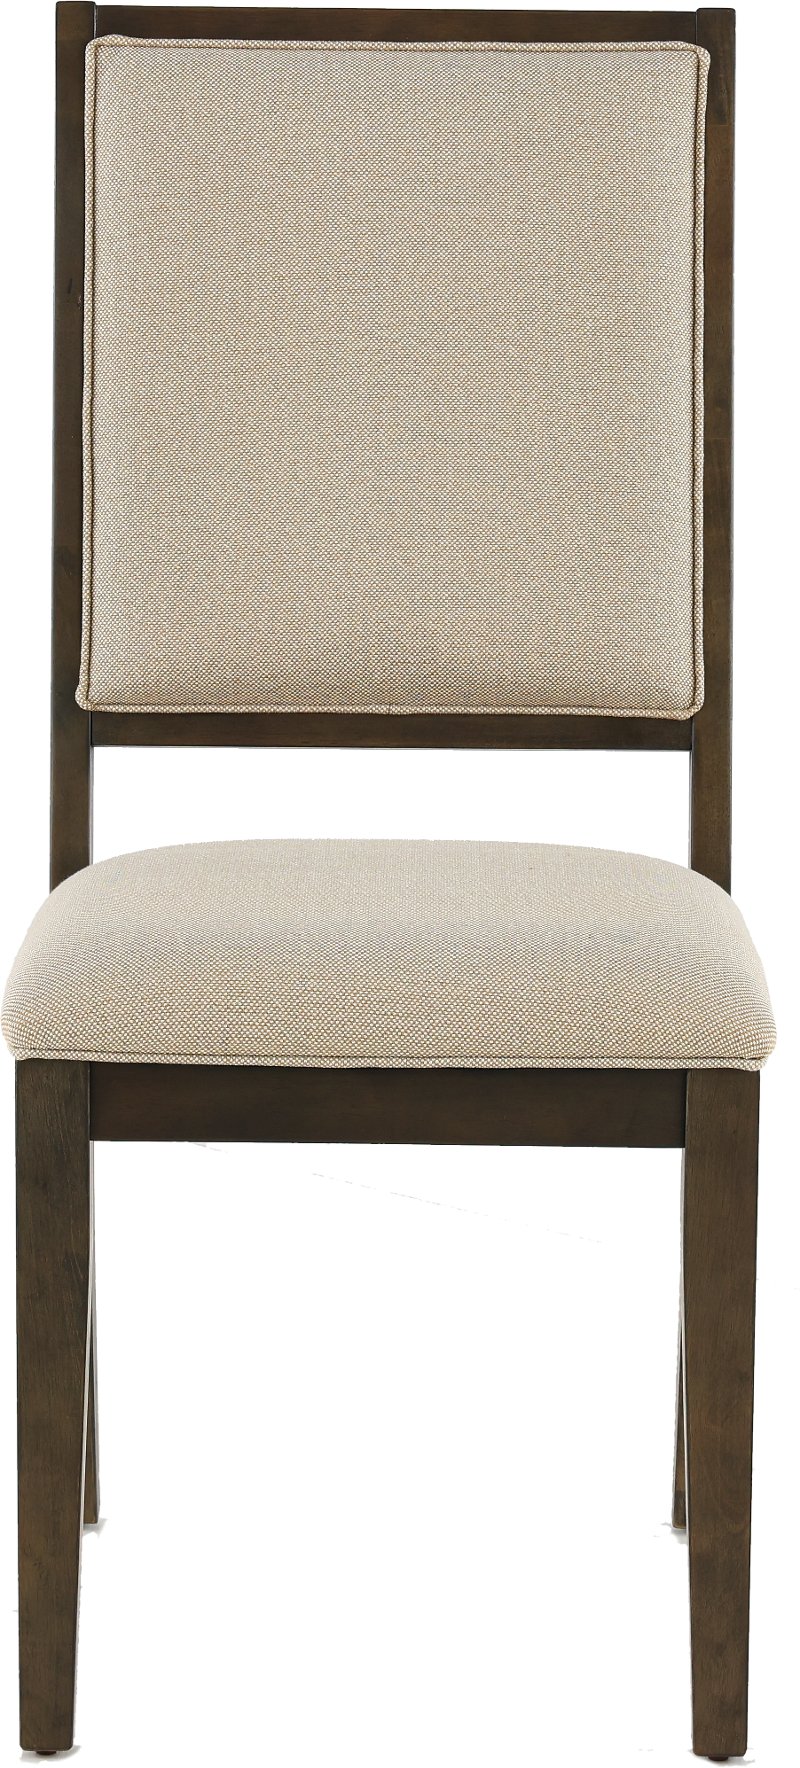 Gray Contemporary Upholstered Dining Chair - Hartford | RC ...
